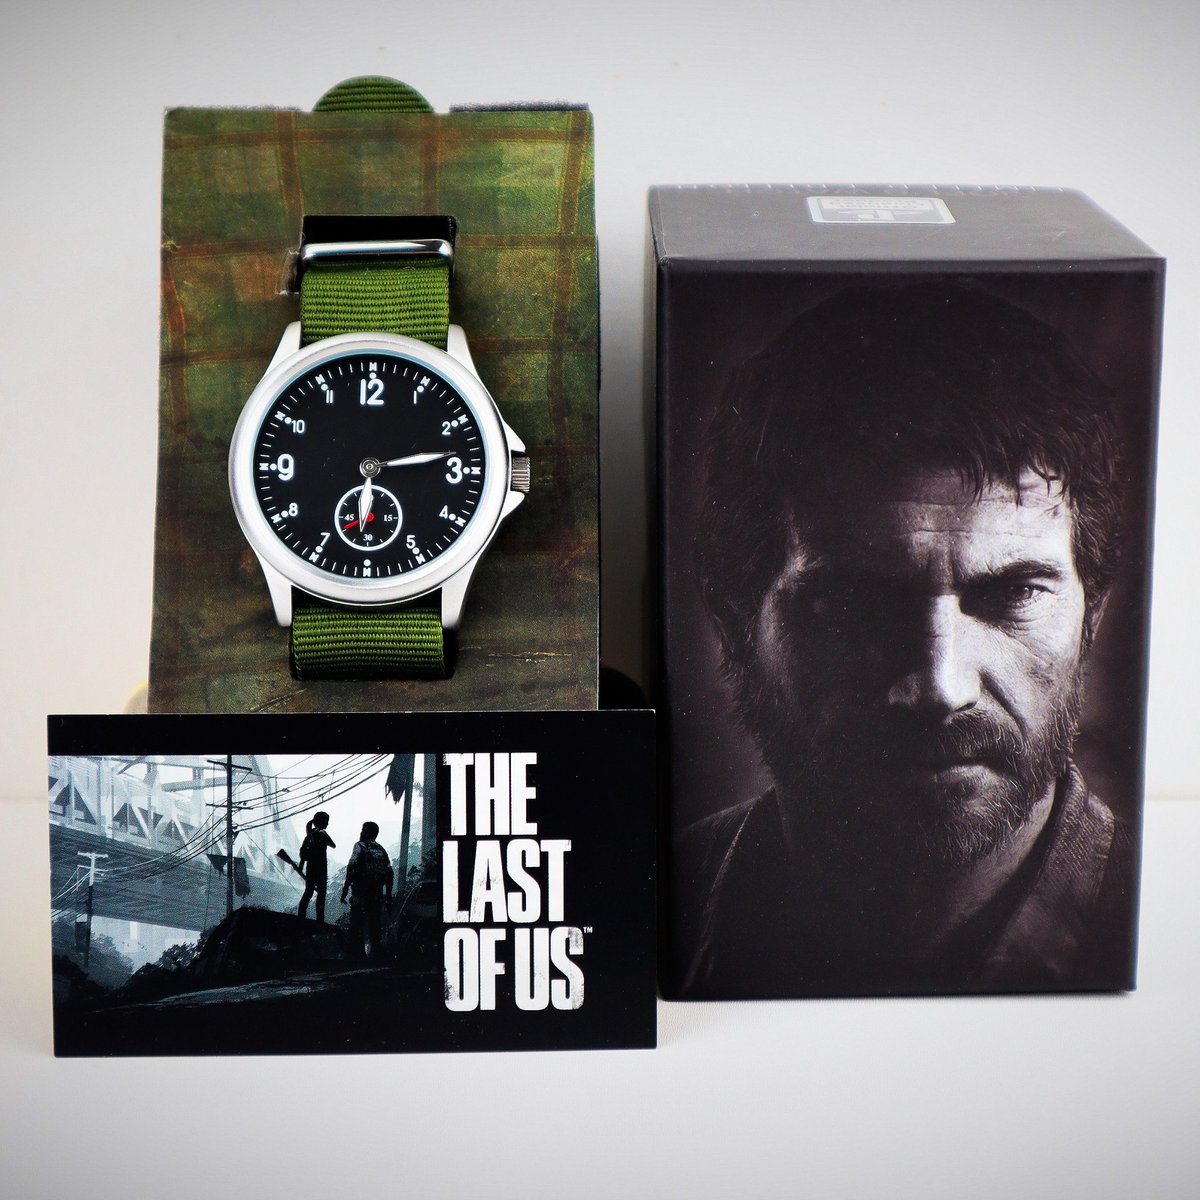 I just published a new post on my @buymeacoffee!

The Last of Us JOEL'S WATCH Unboxing 
buymeacoffee.com/joystick.ua/th… 

#JOELSWATCH #TheLastofUs #TheLastofUsWATCH #JOELSWATCHthelastofus  #TheLastofUsUnboxing #Unboxing #UnboxingTheLastofUs #playstation3 #одниизнас